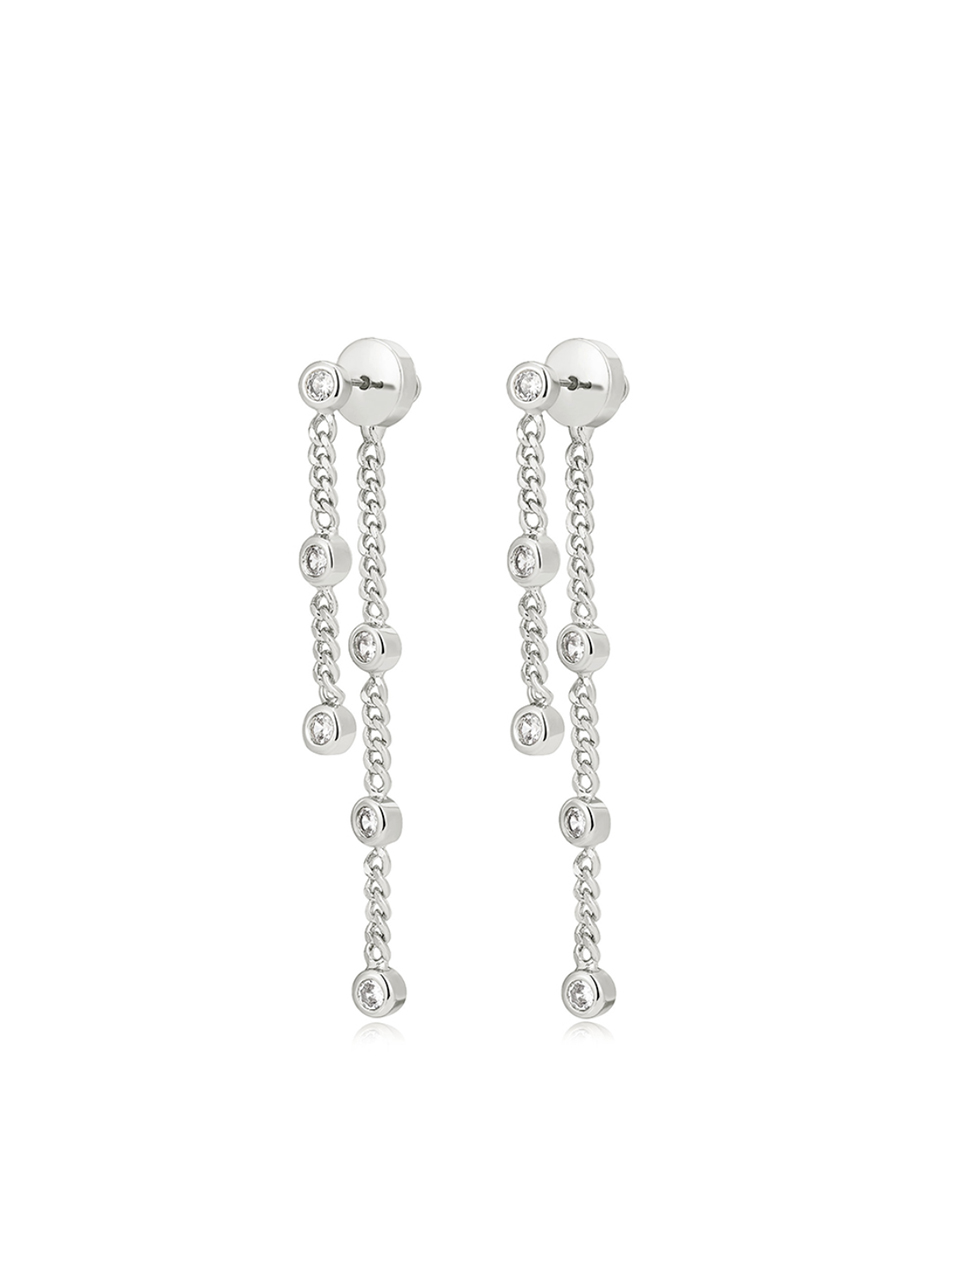 LUV AJ Estelle Double Chain Studs in Silver Product Shot 